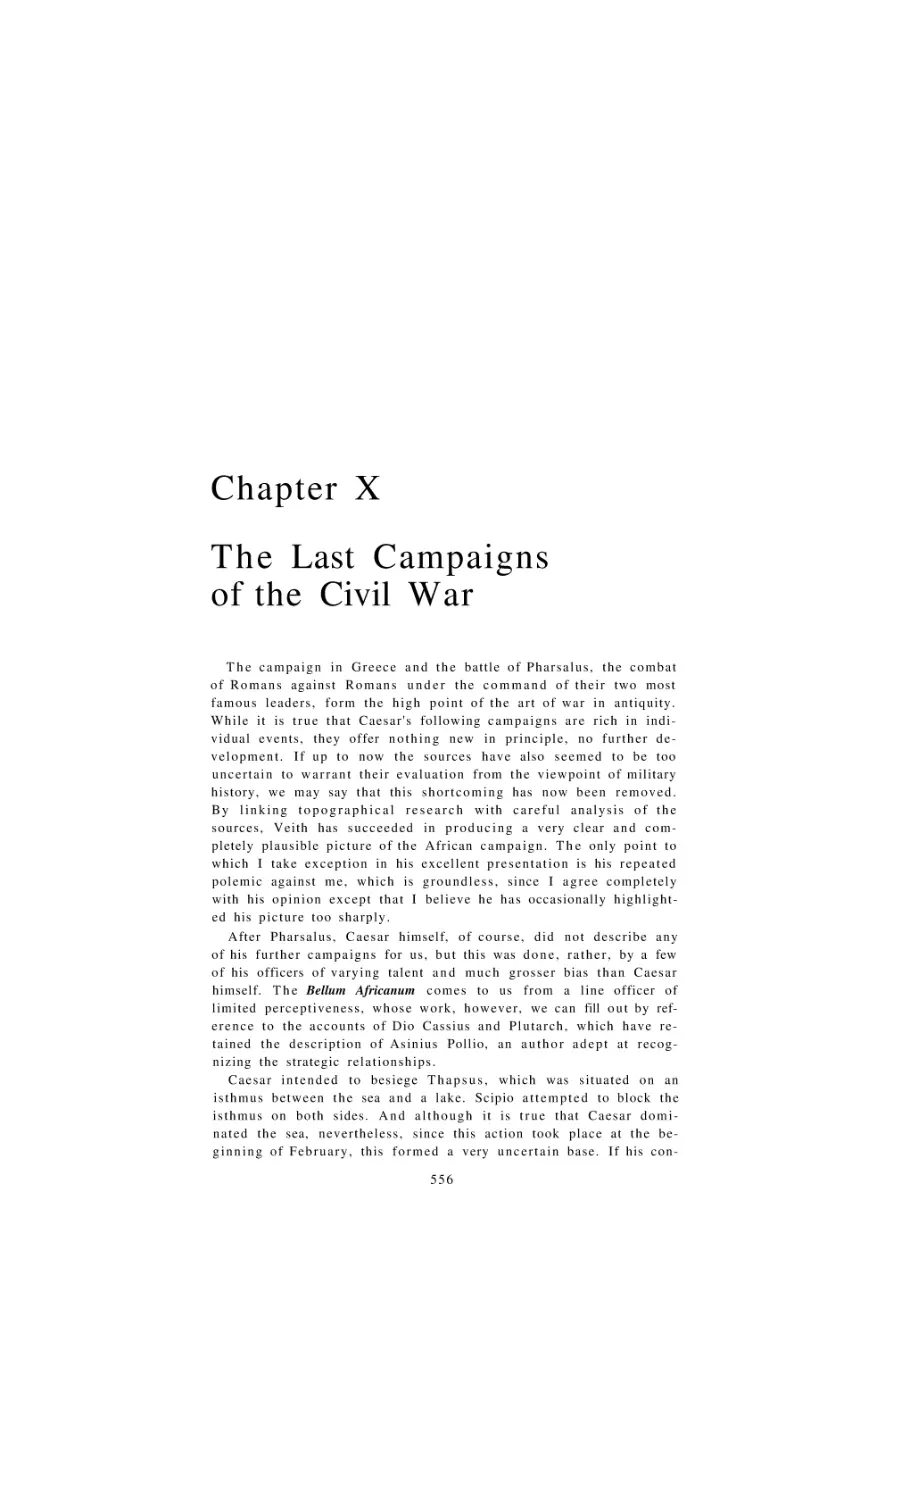 The Last Campaigns of the Civil War